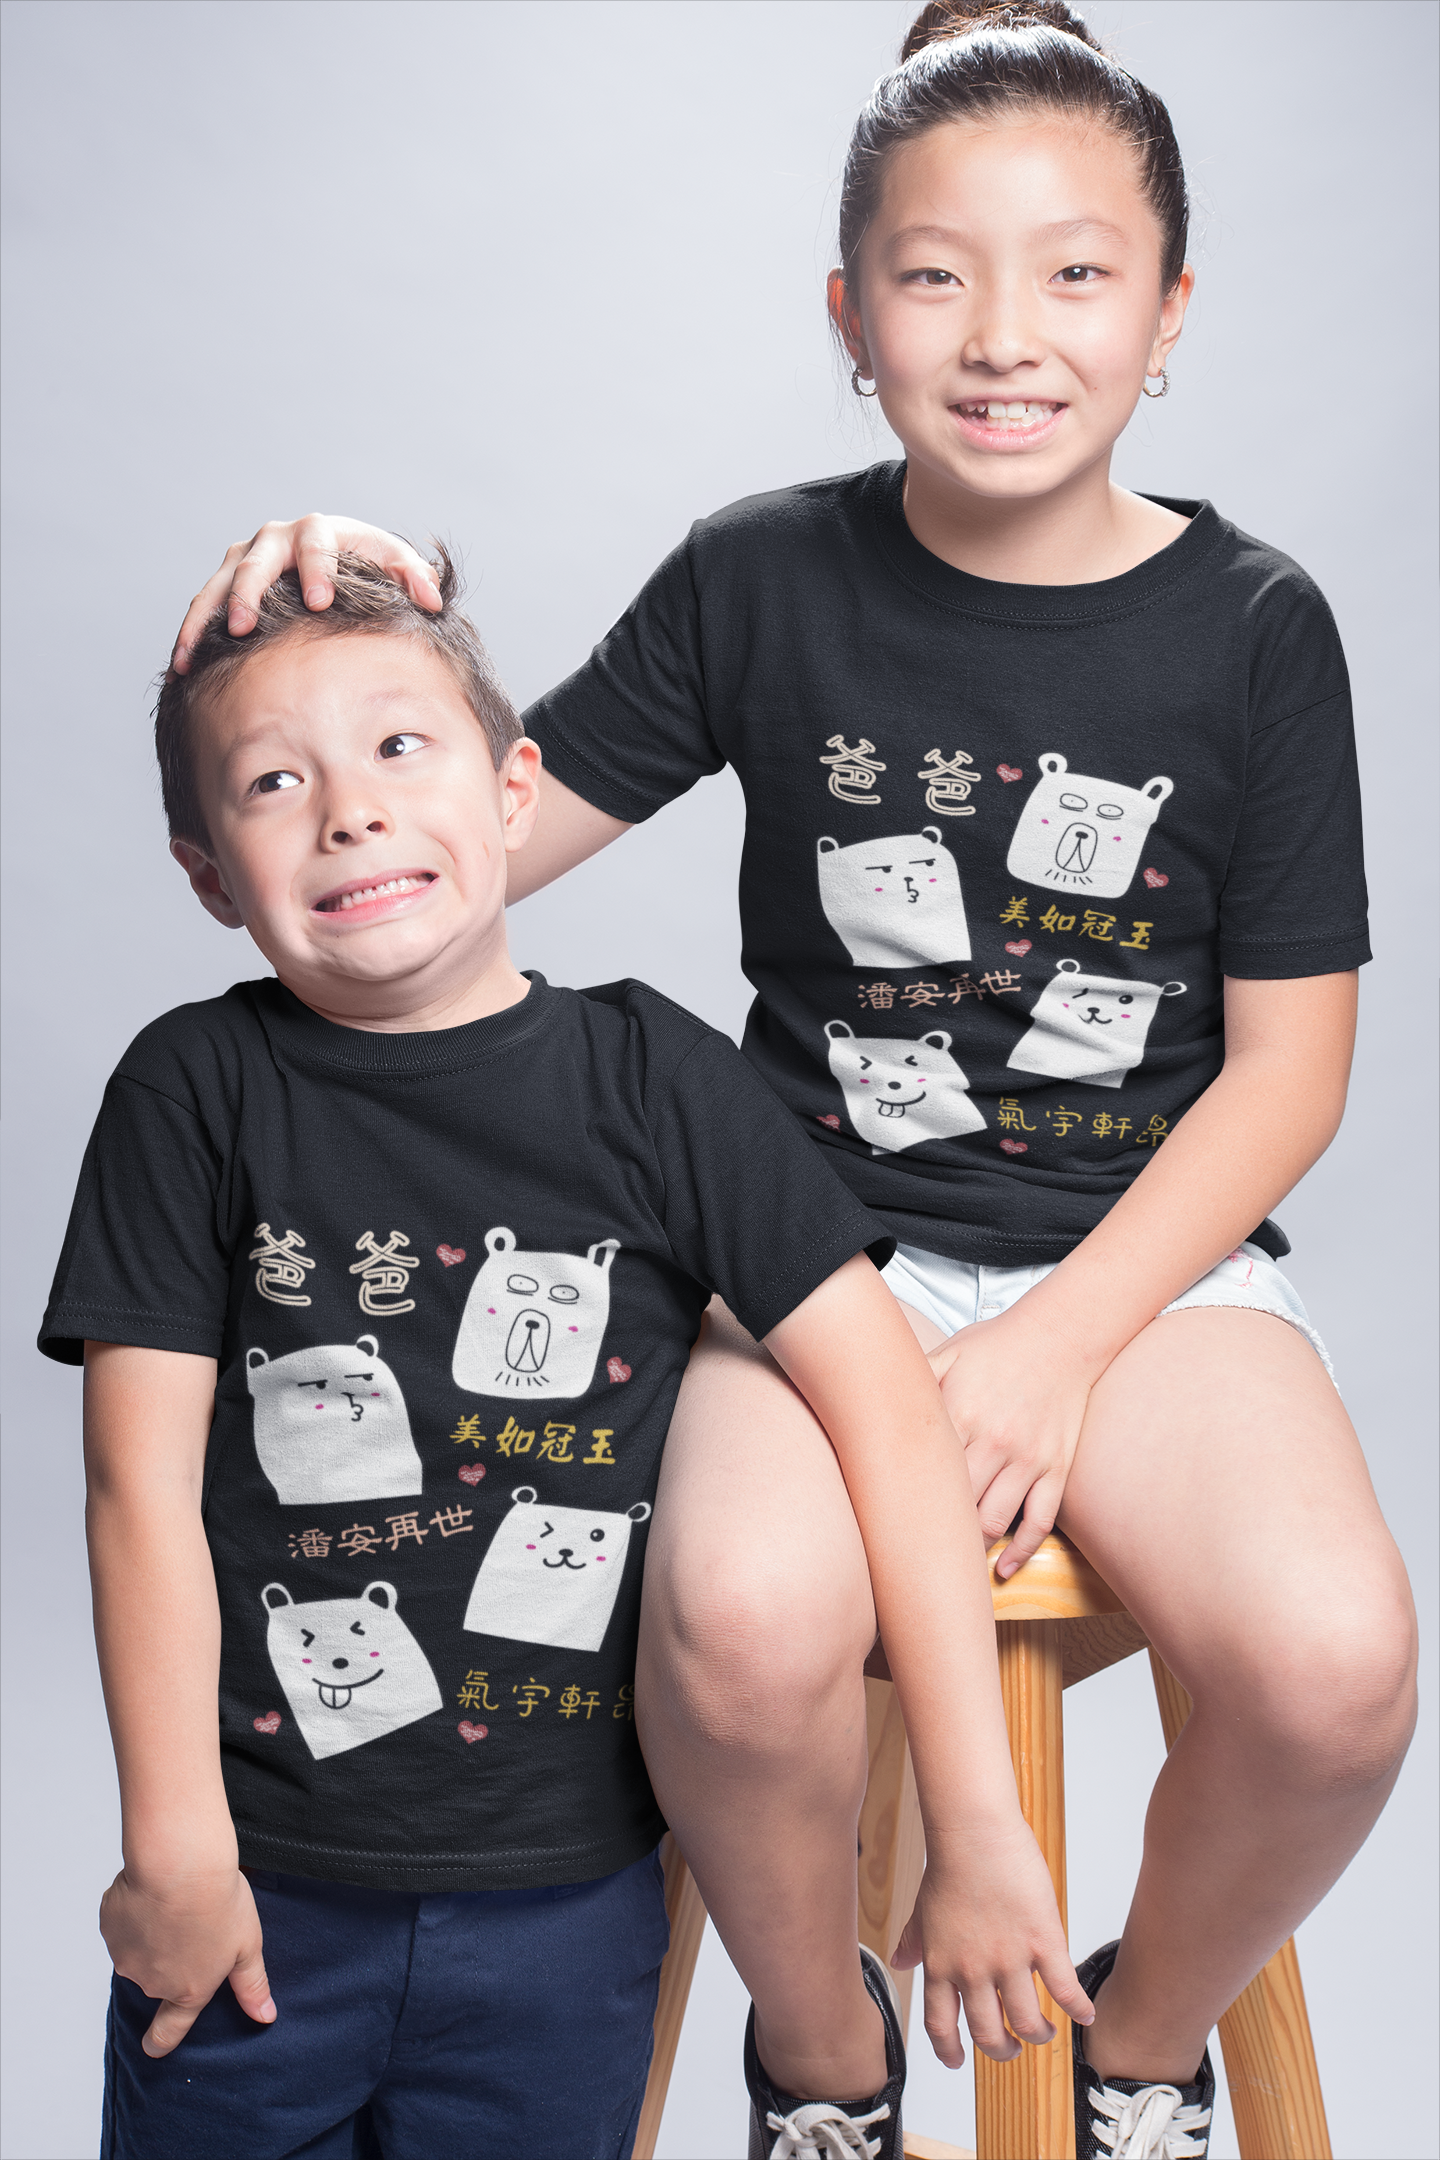 Kids Dad is So Awesome 我爸爸超級棒 T-Shirt